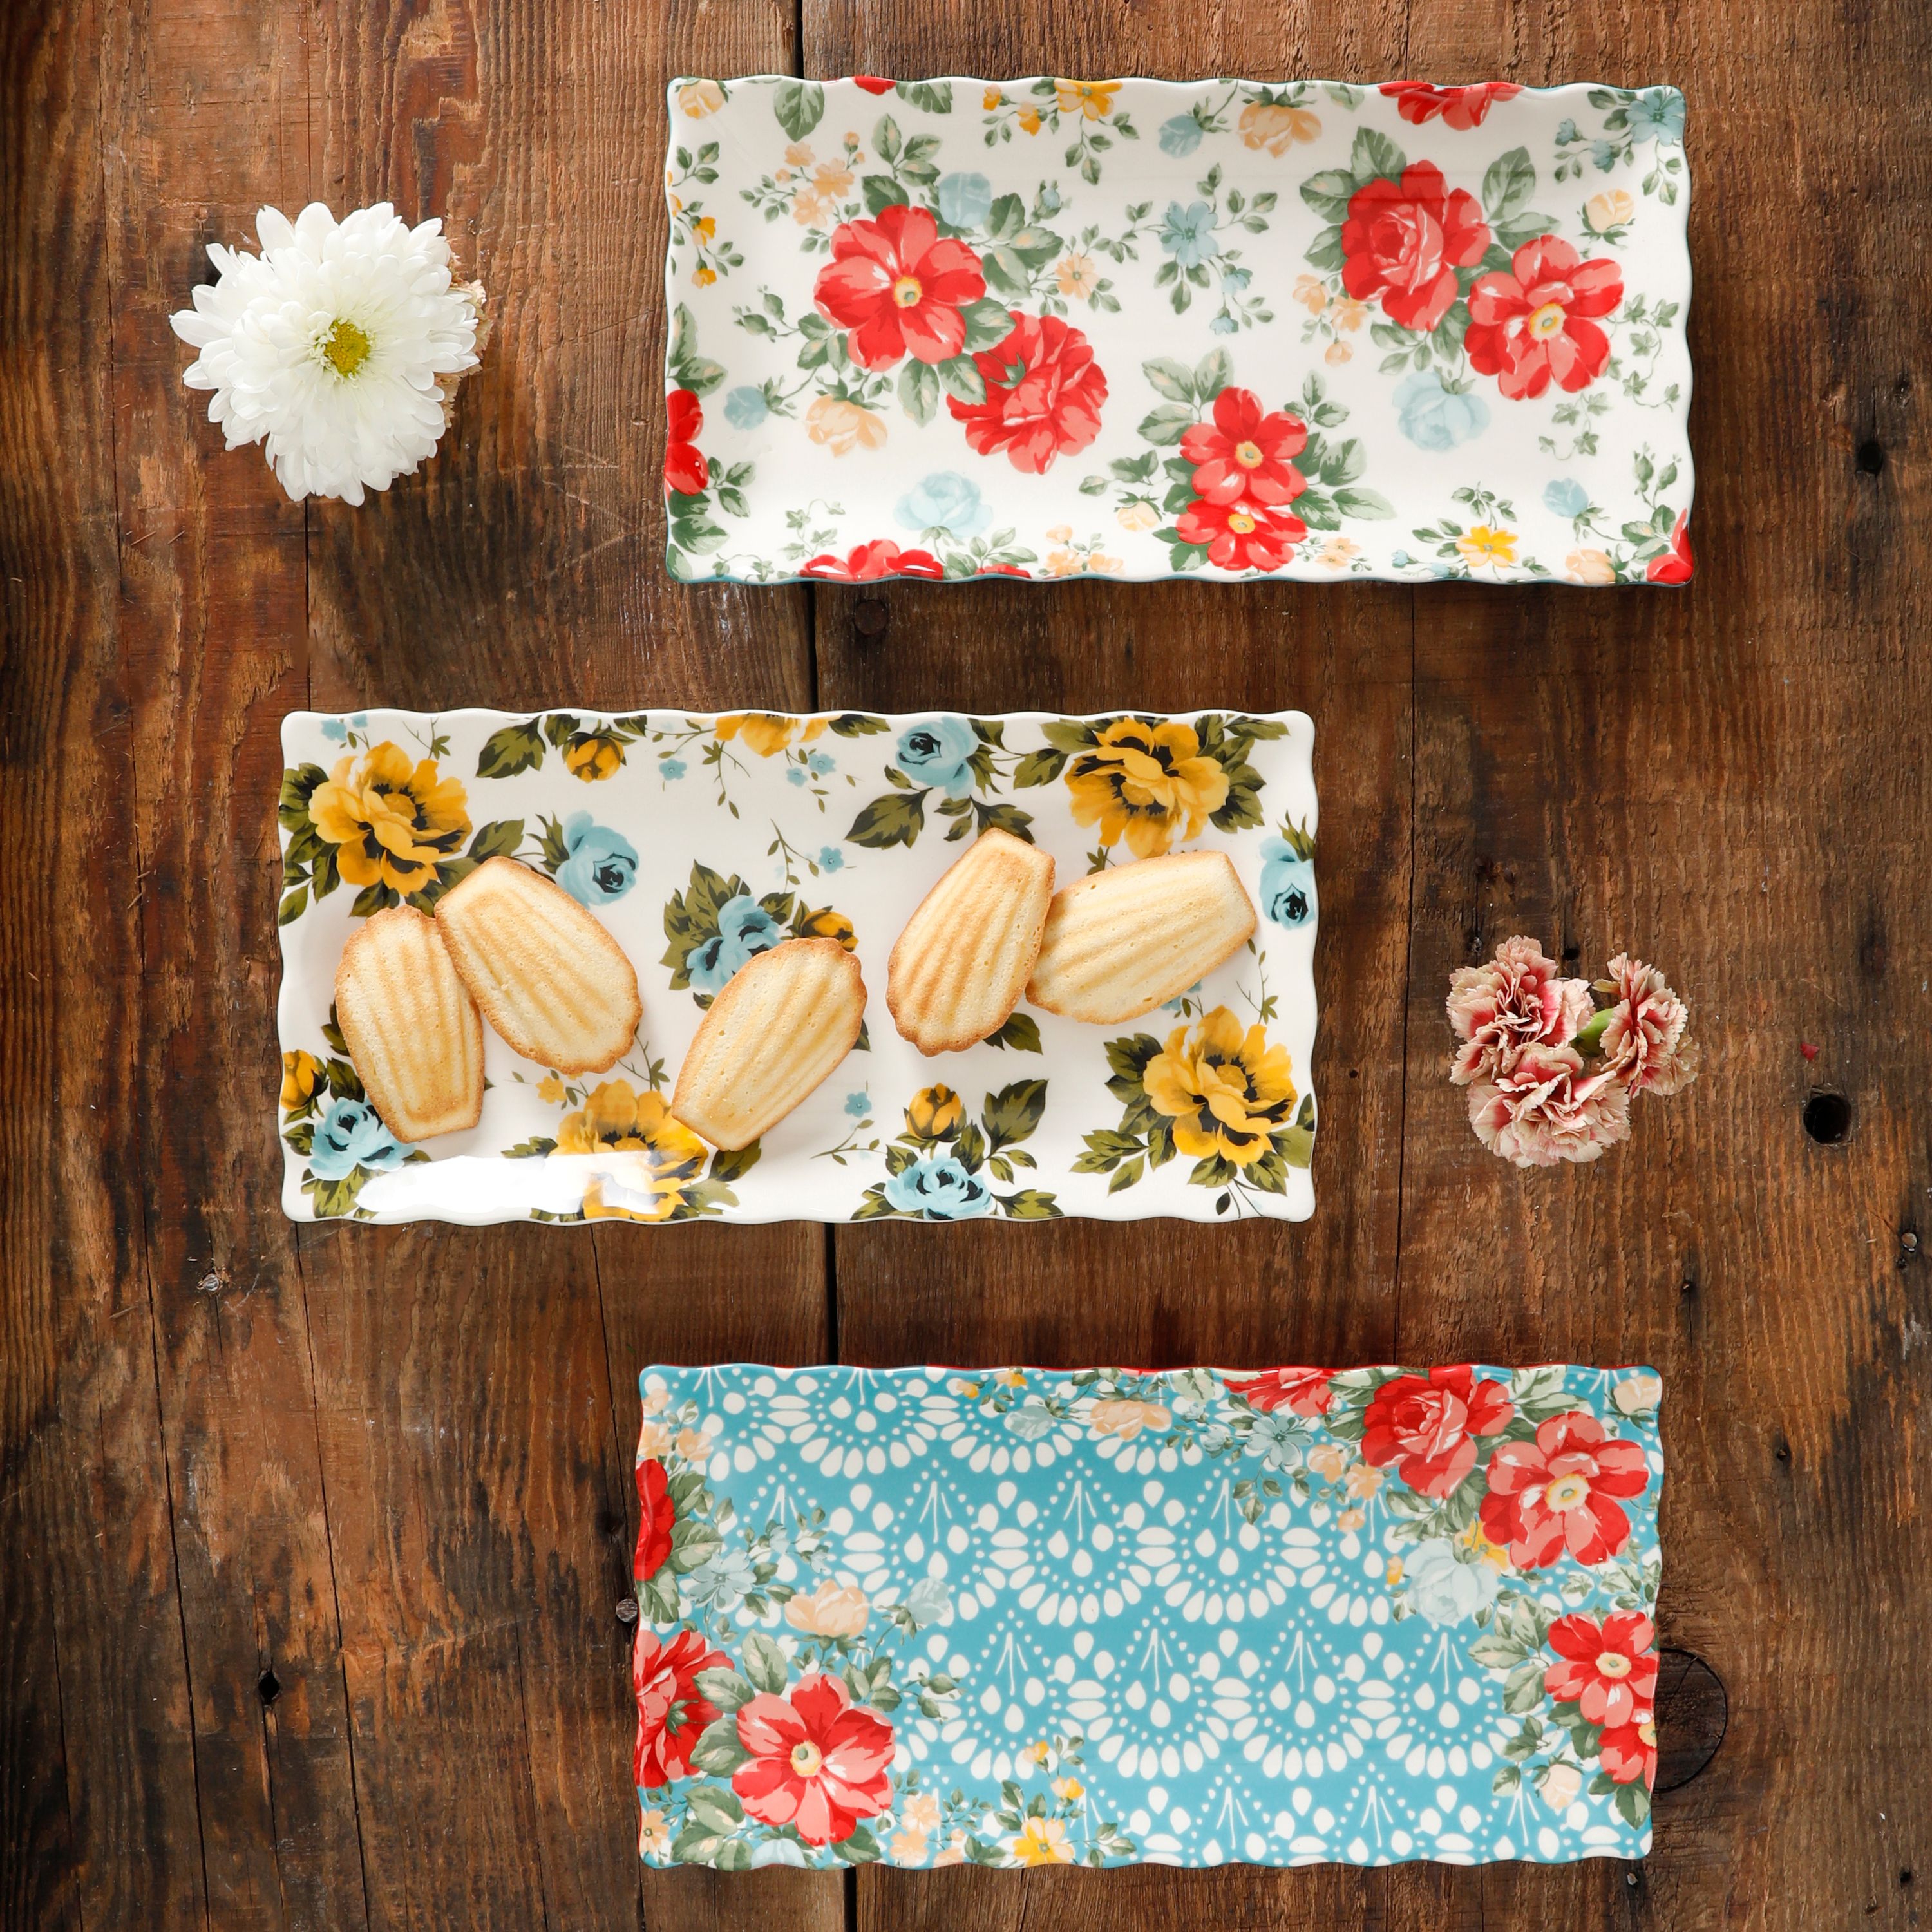 The Pioneer Woman Floral Medley 3-Piece Serving Platters - image 2 of 8